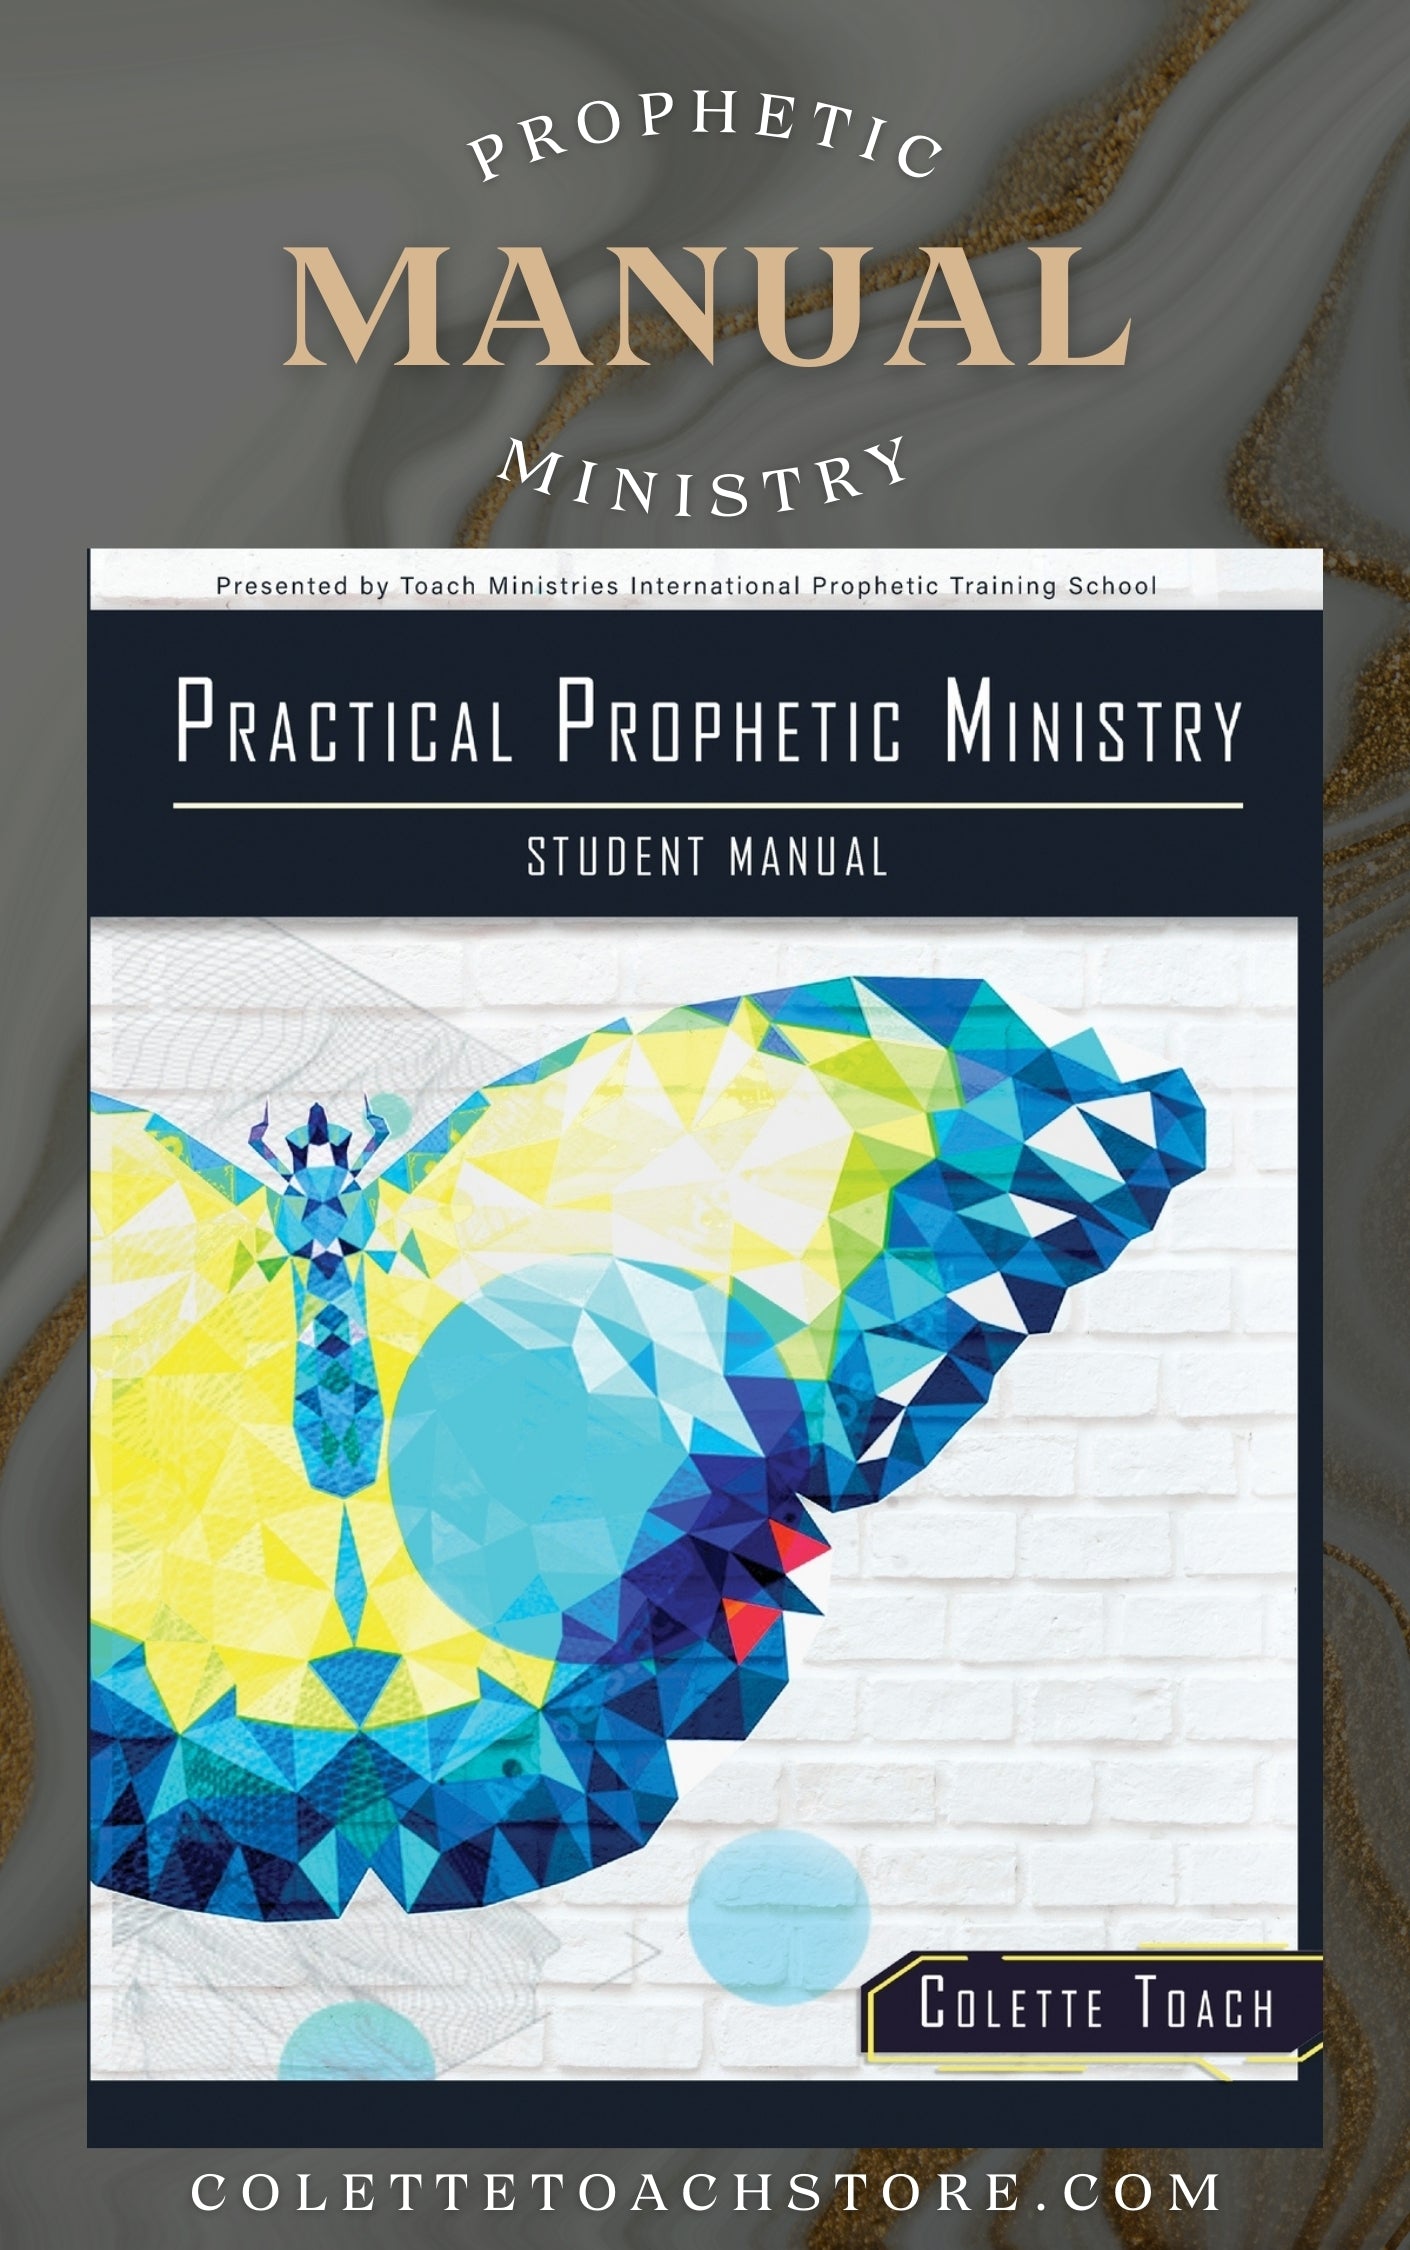 Practical Prophetic Ministry Student Manual